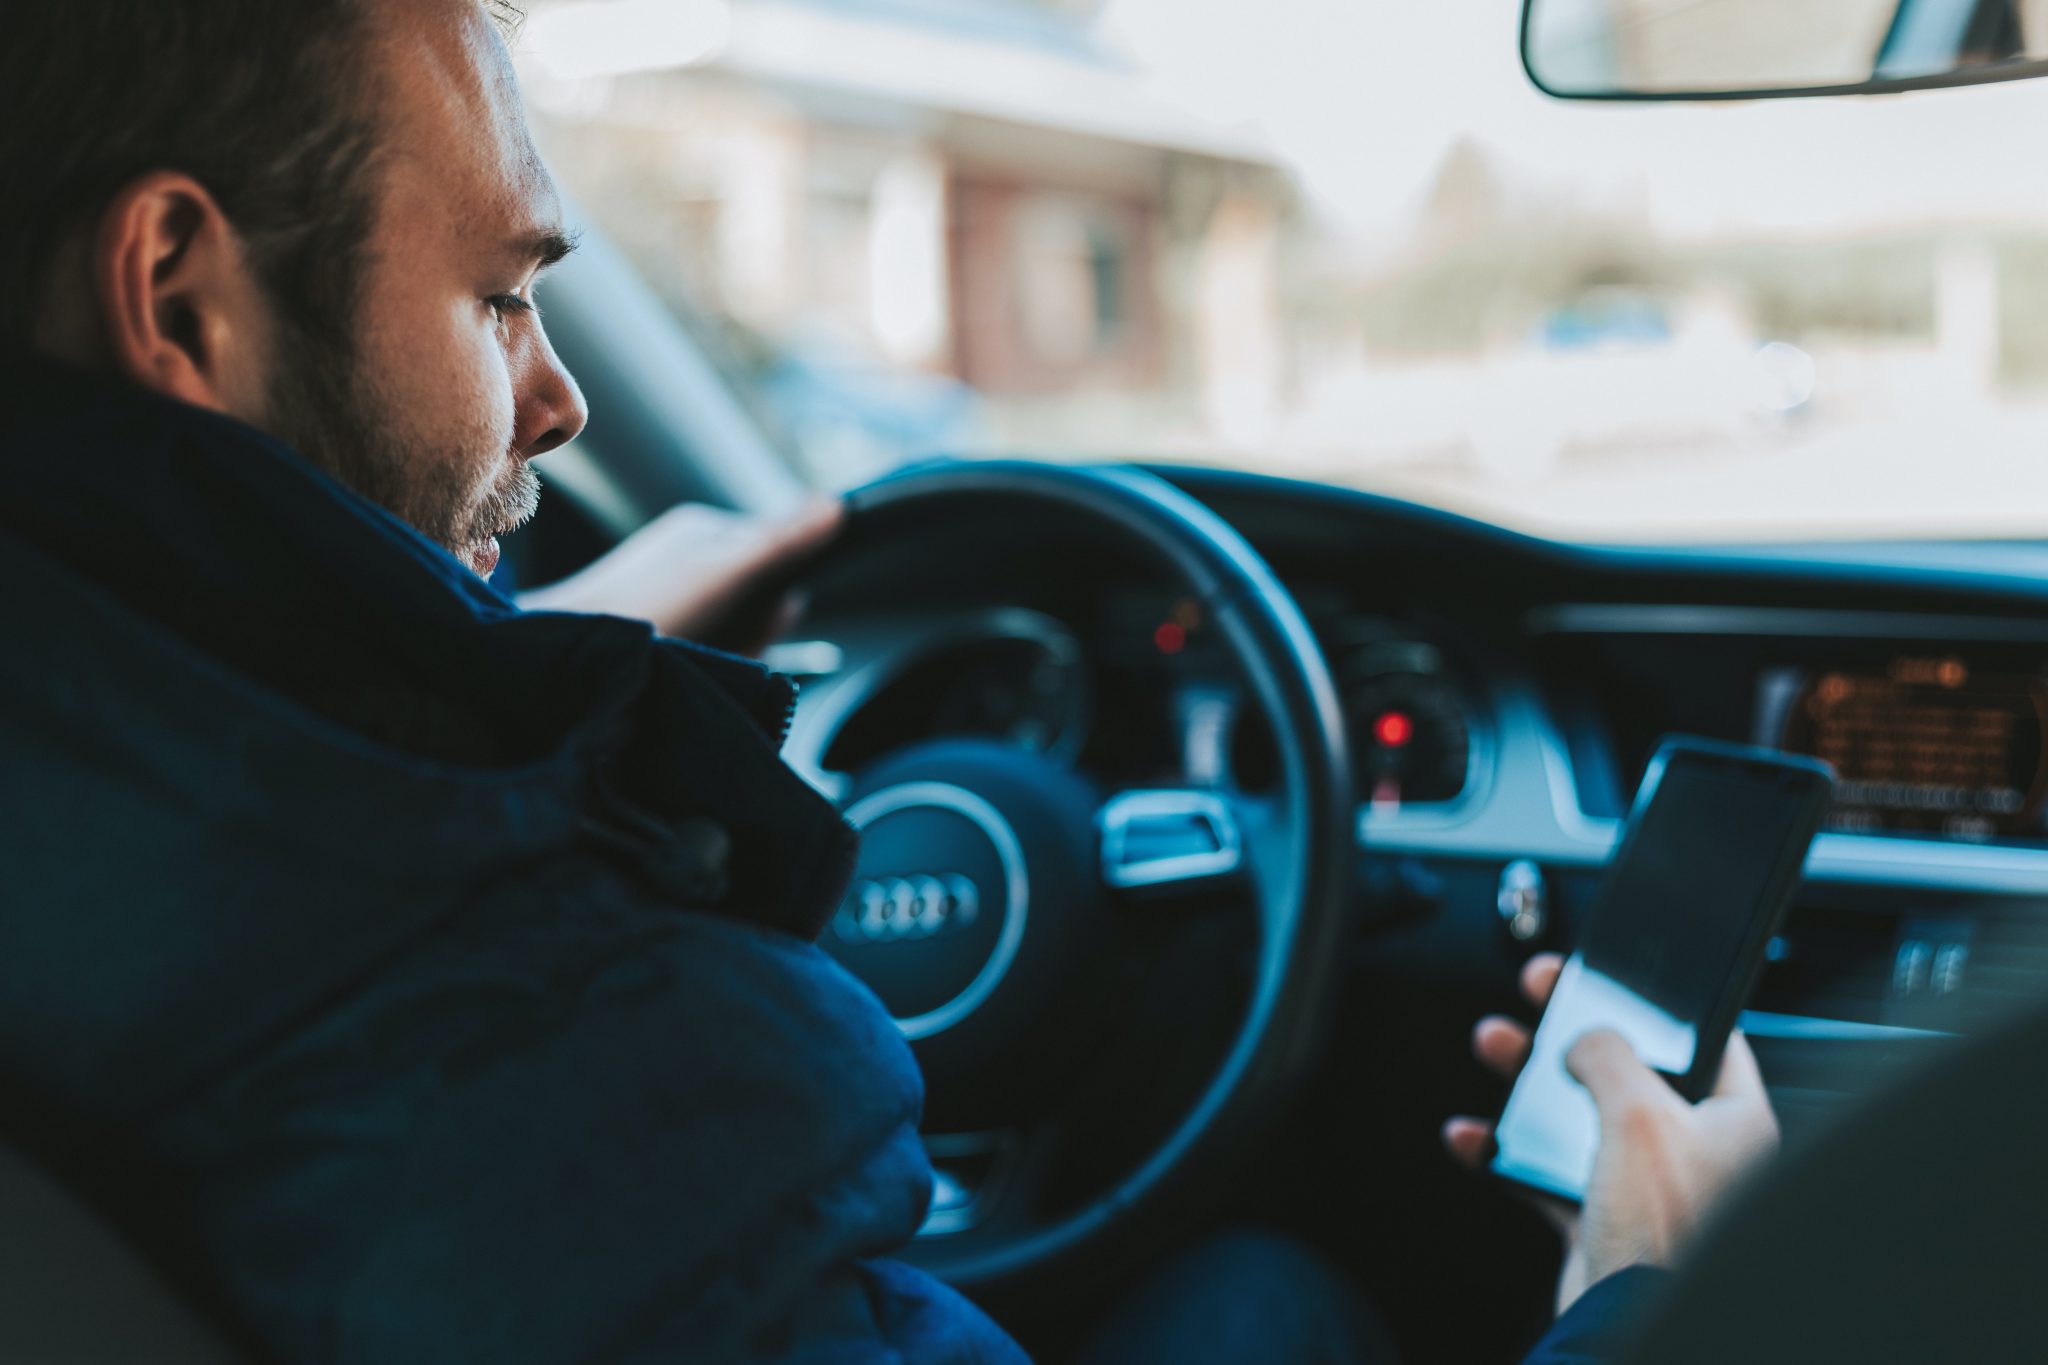 3 Tips to Minimize Distracted Driving